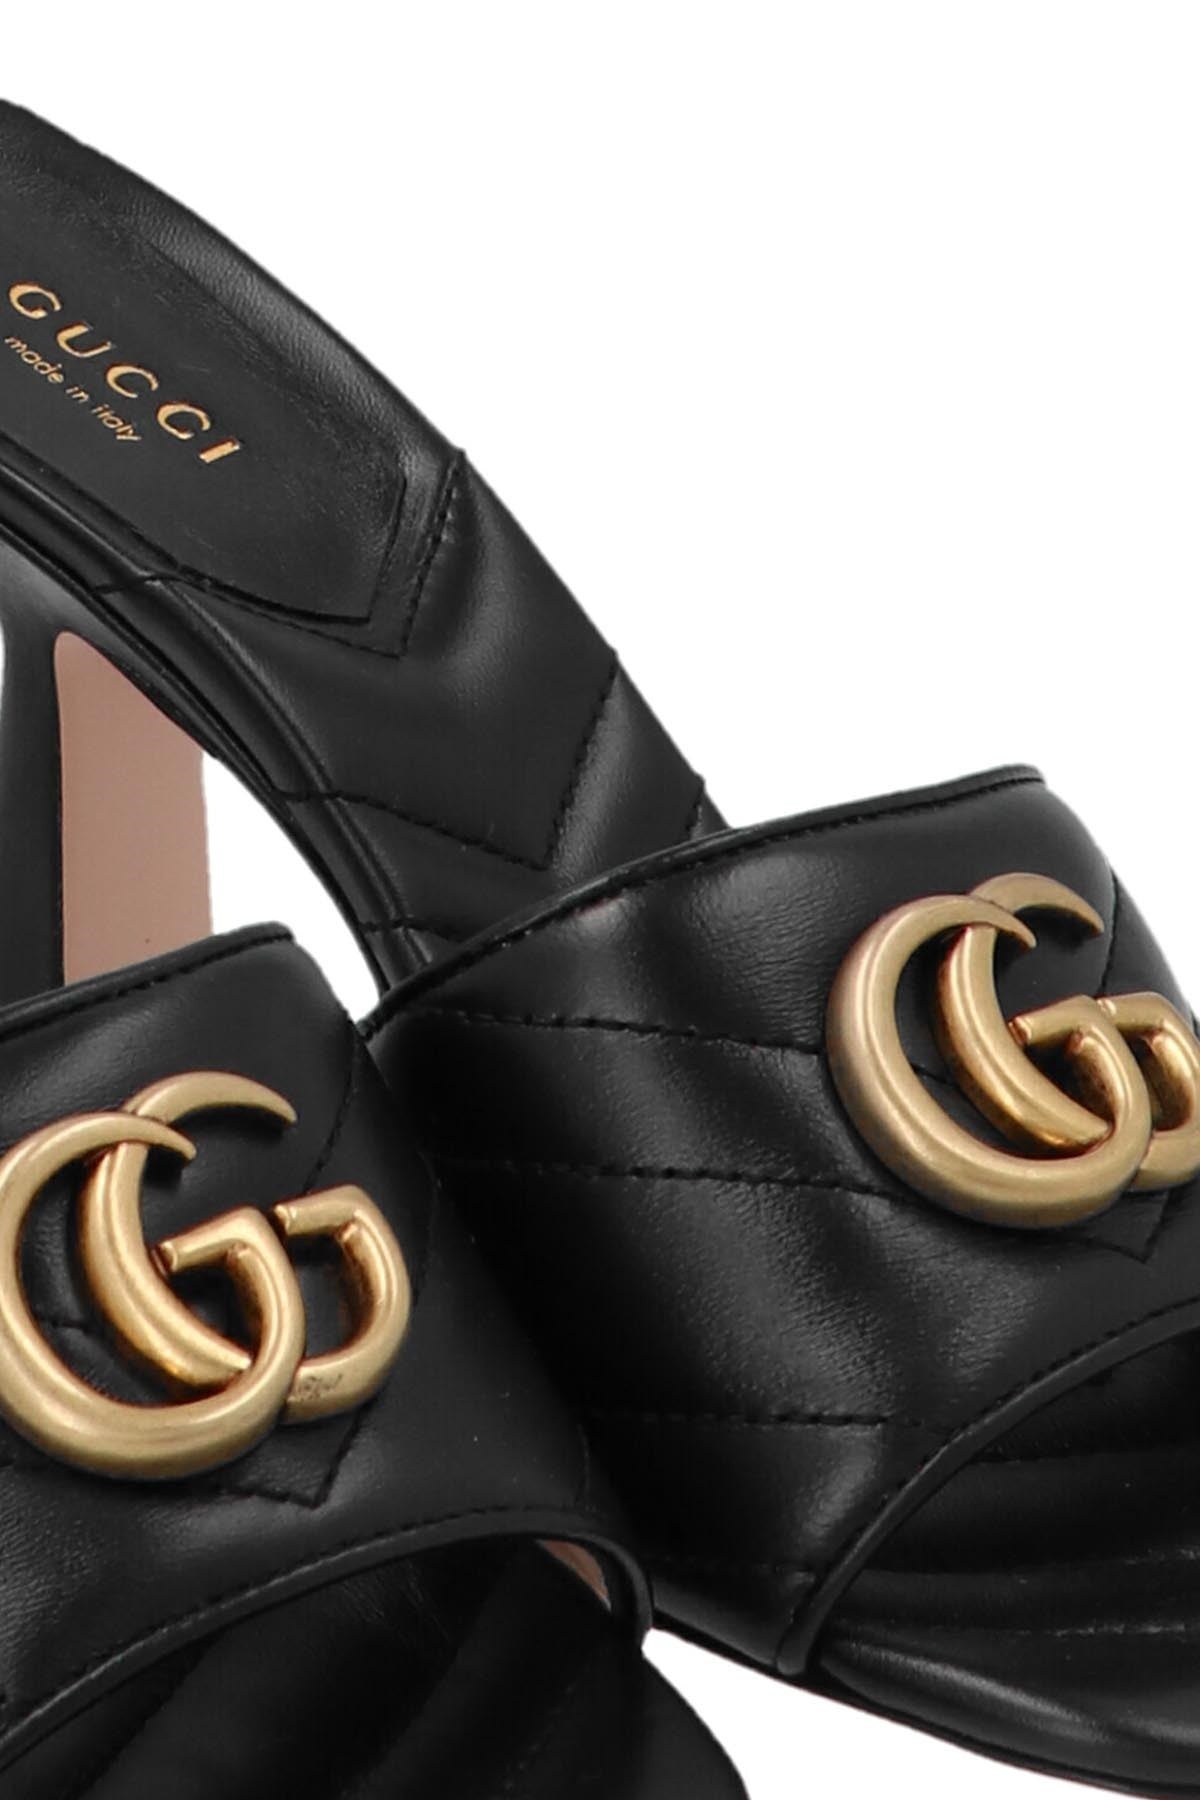 GUCCI GG MARMONT SANDALS - 4